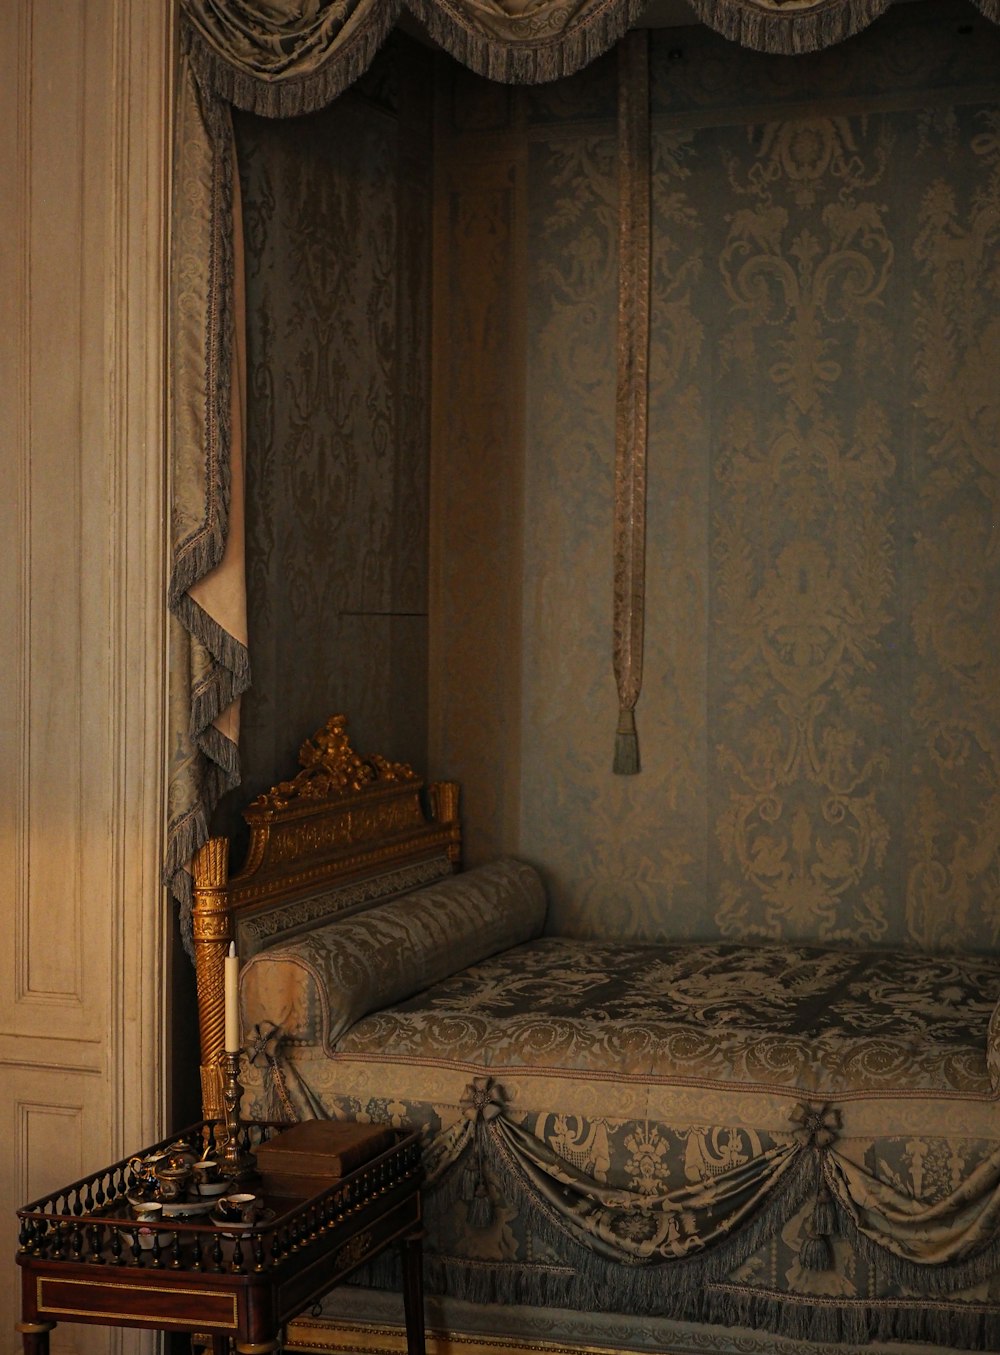 a bed with a decorative headboard